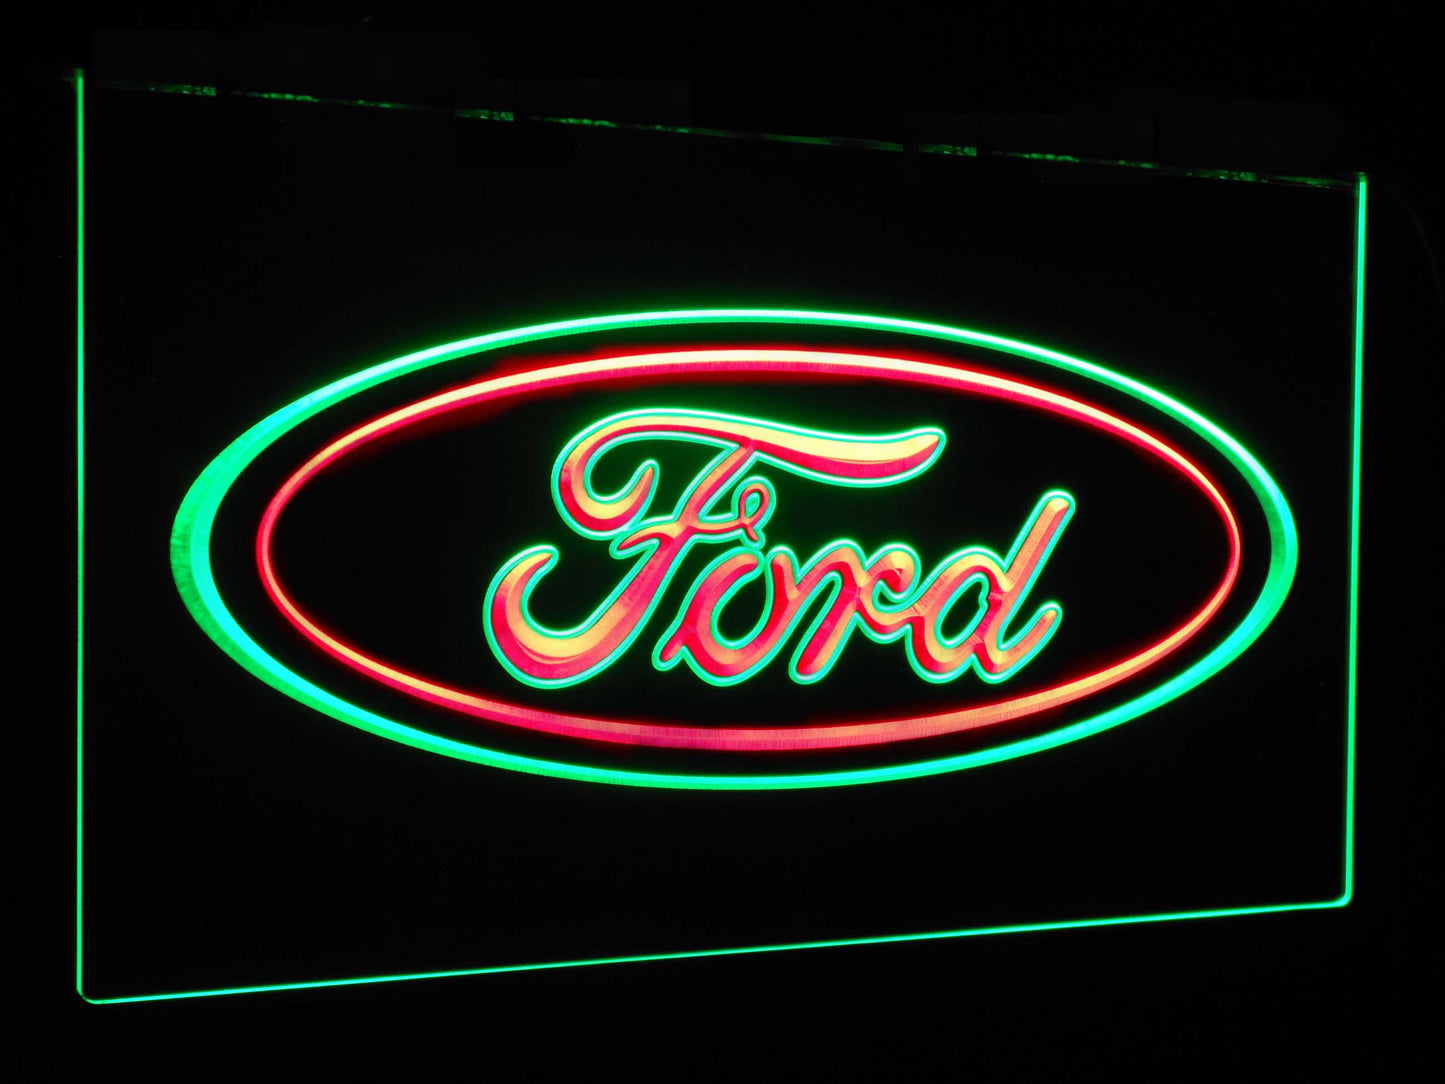 Ford car Transport Bar Decoration Gift Dual Color Led Neon Light Signs st6-d0007 by Woody Signs Co. - Handmade Crafted Unique Wooden Creative